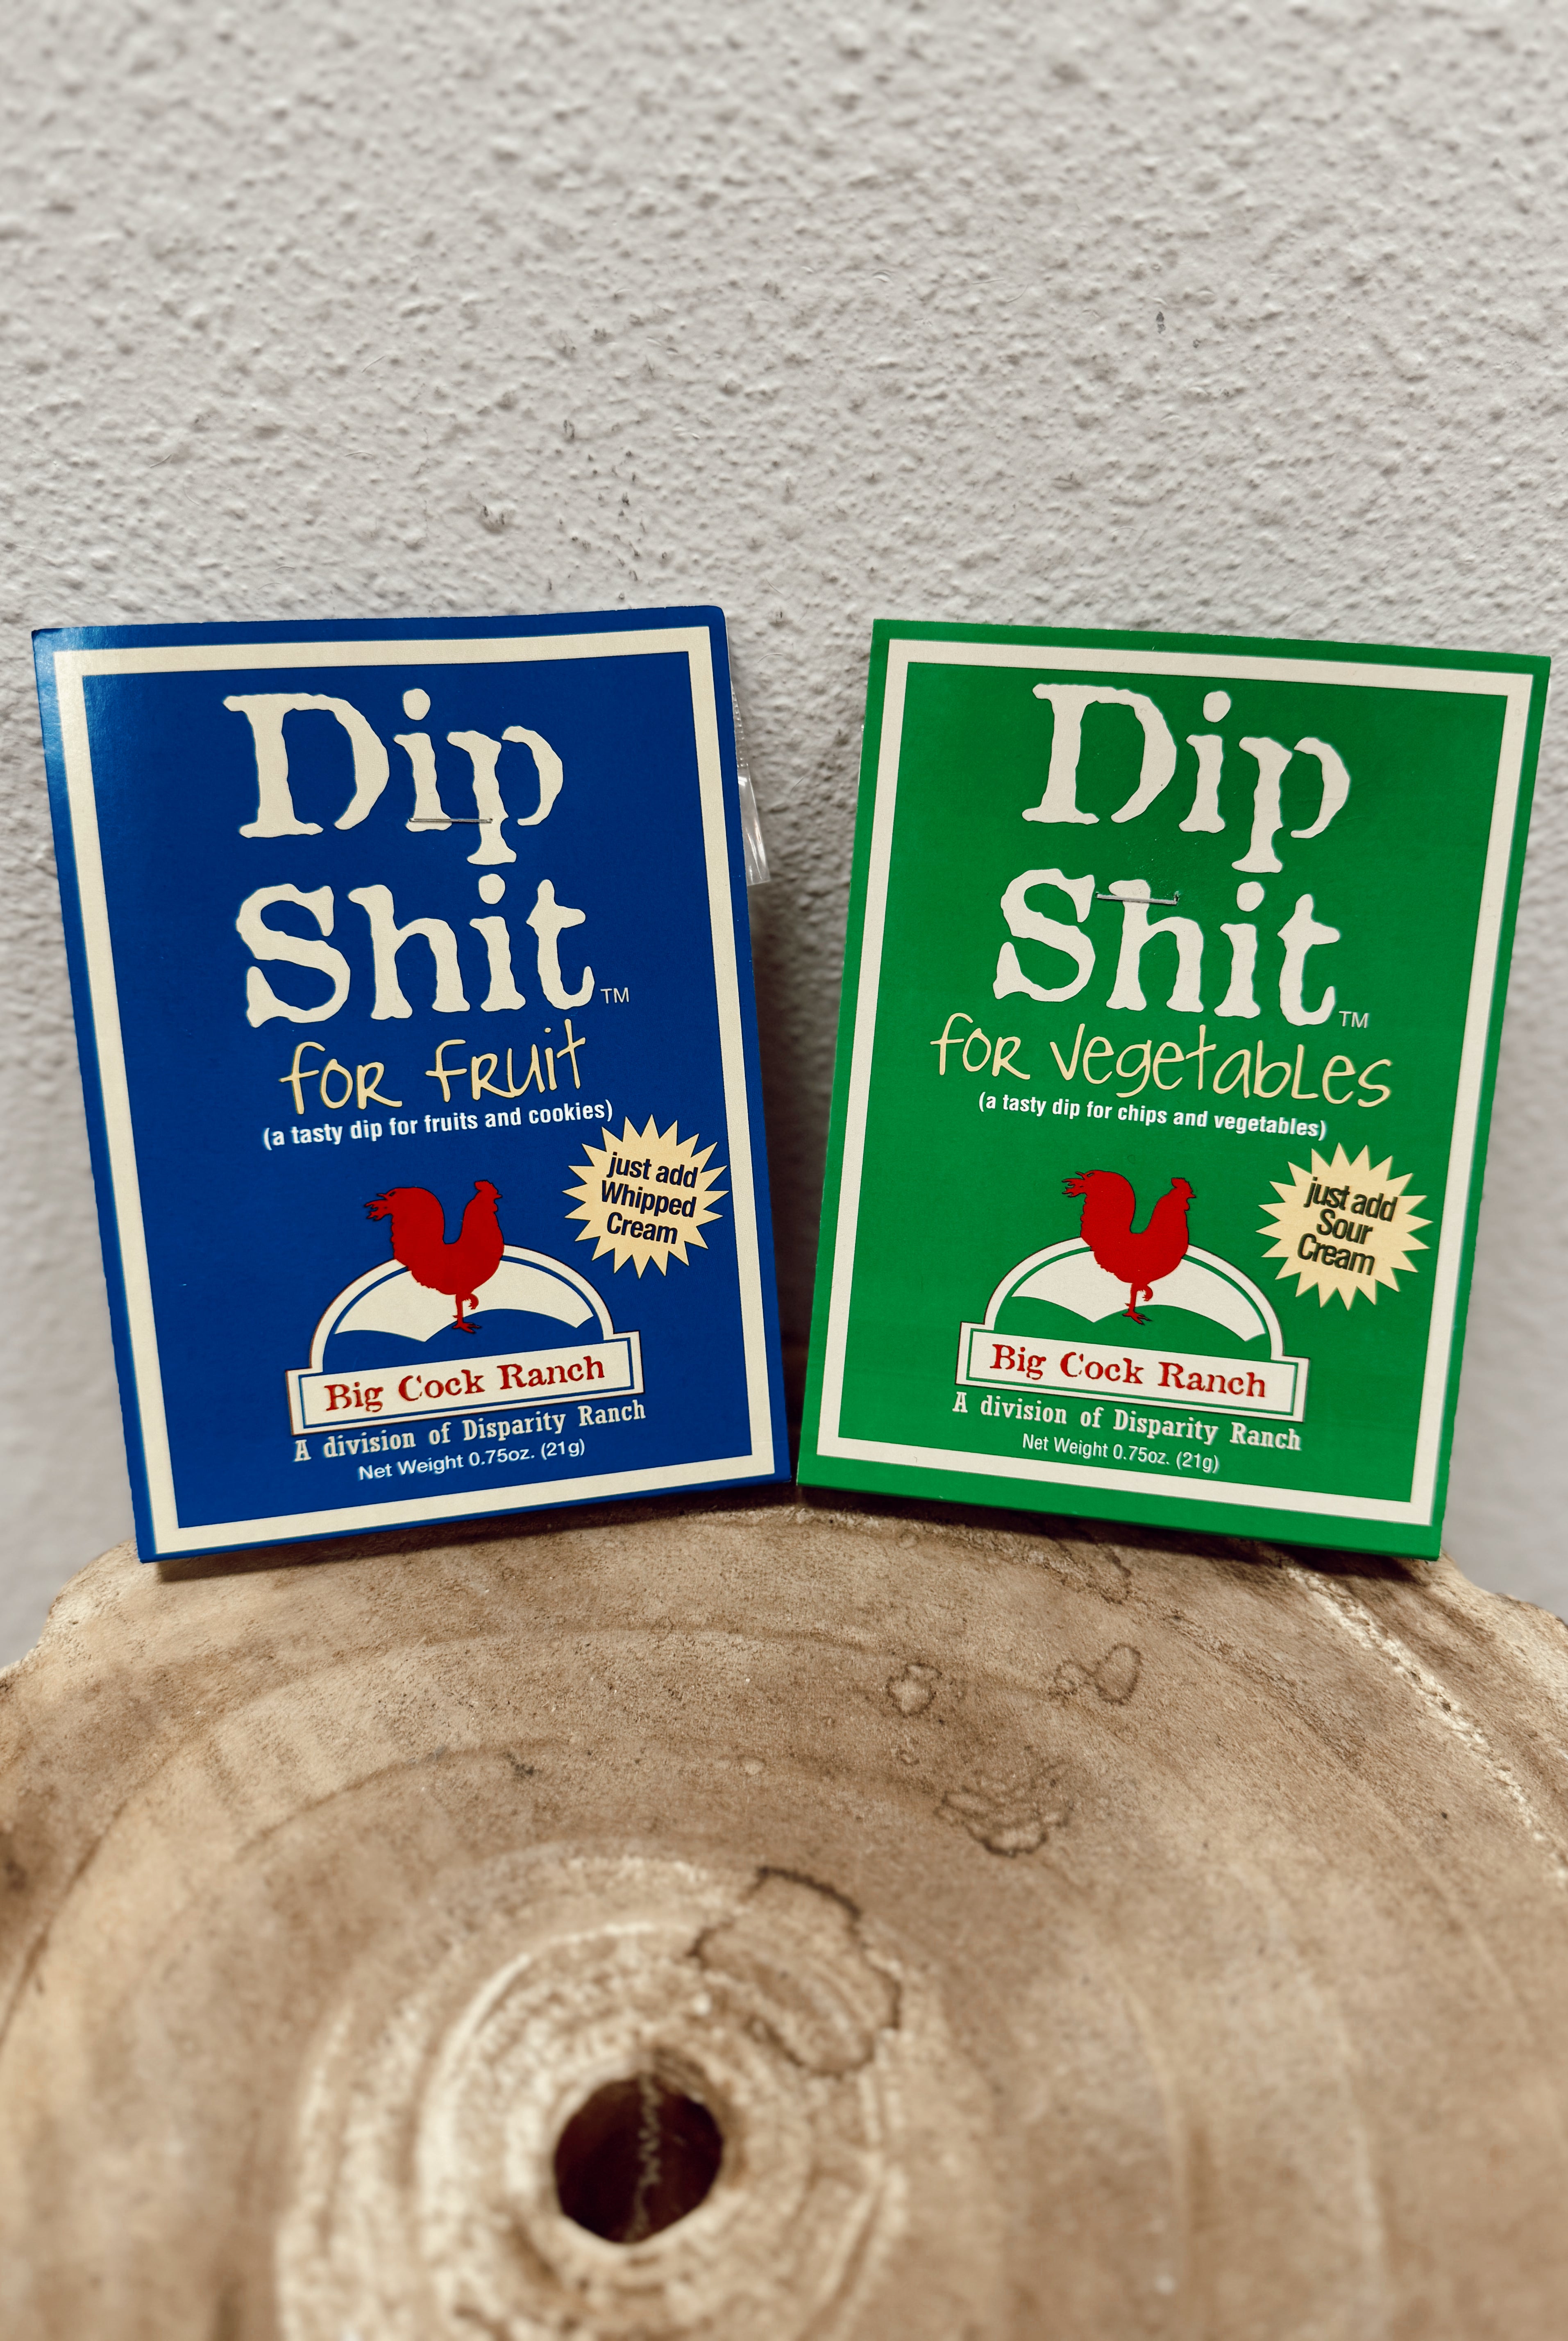 Dip Shit for Fruit or Dip Shit for Vegetables Dip Shit Envelope-Food Items-The Beautylish Silo-The Silo Boutique, Women's Fashion Boutique Located in Warren and Grand Forks North Dakota